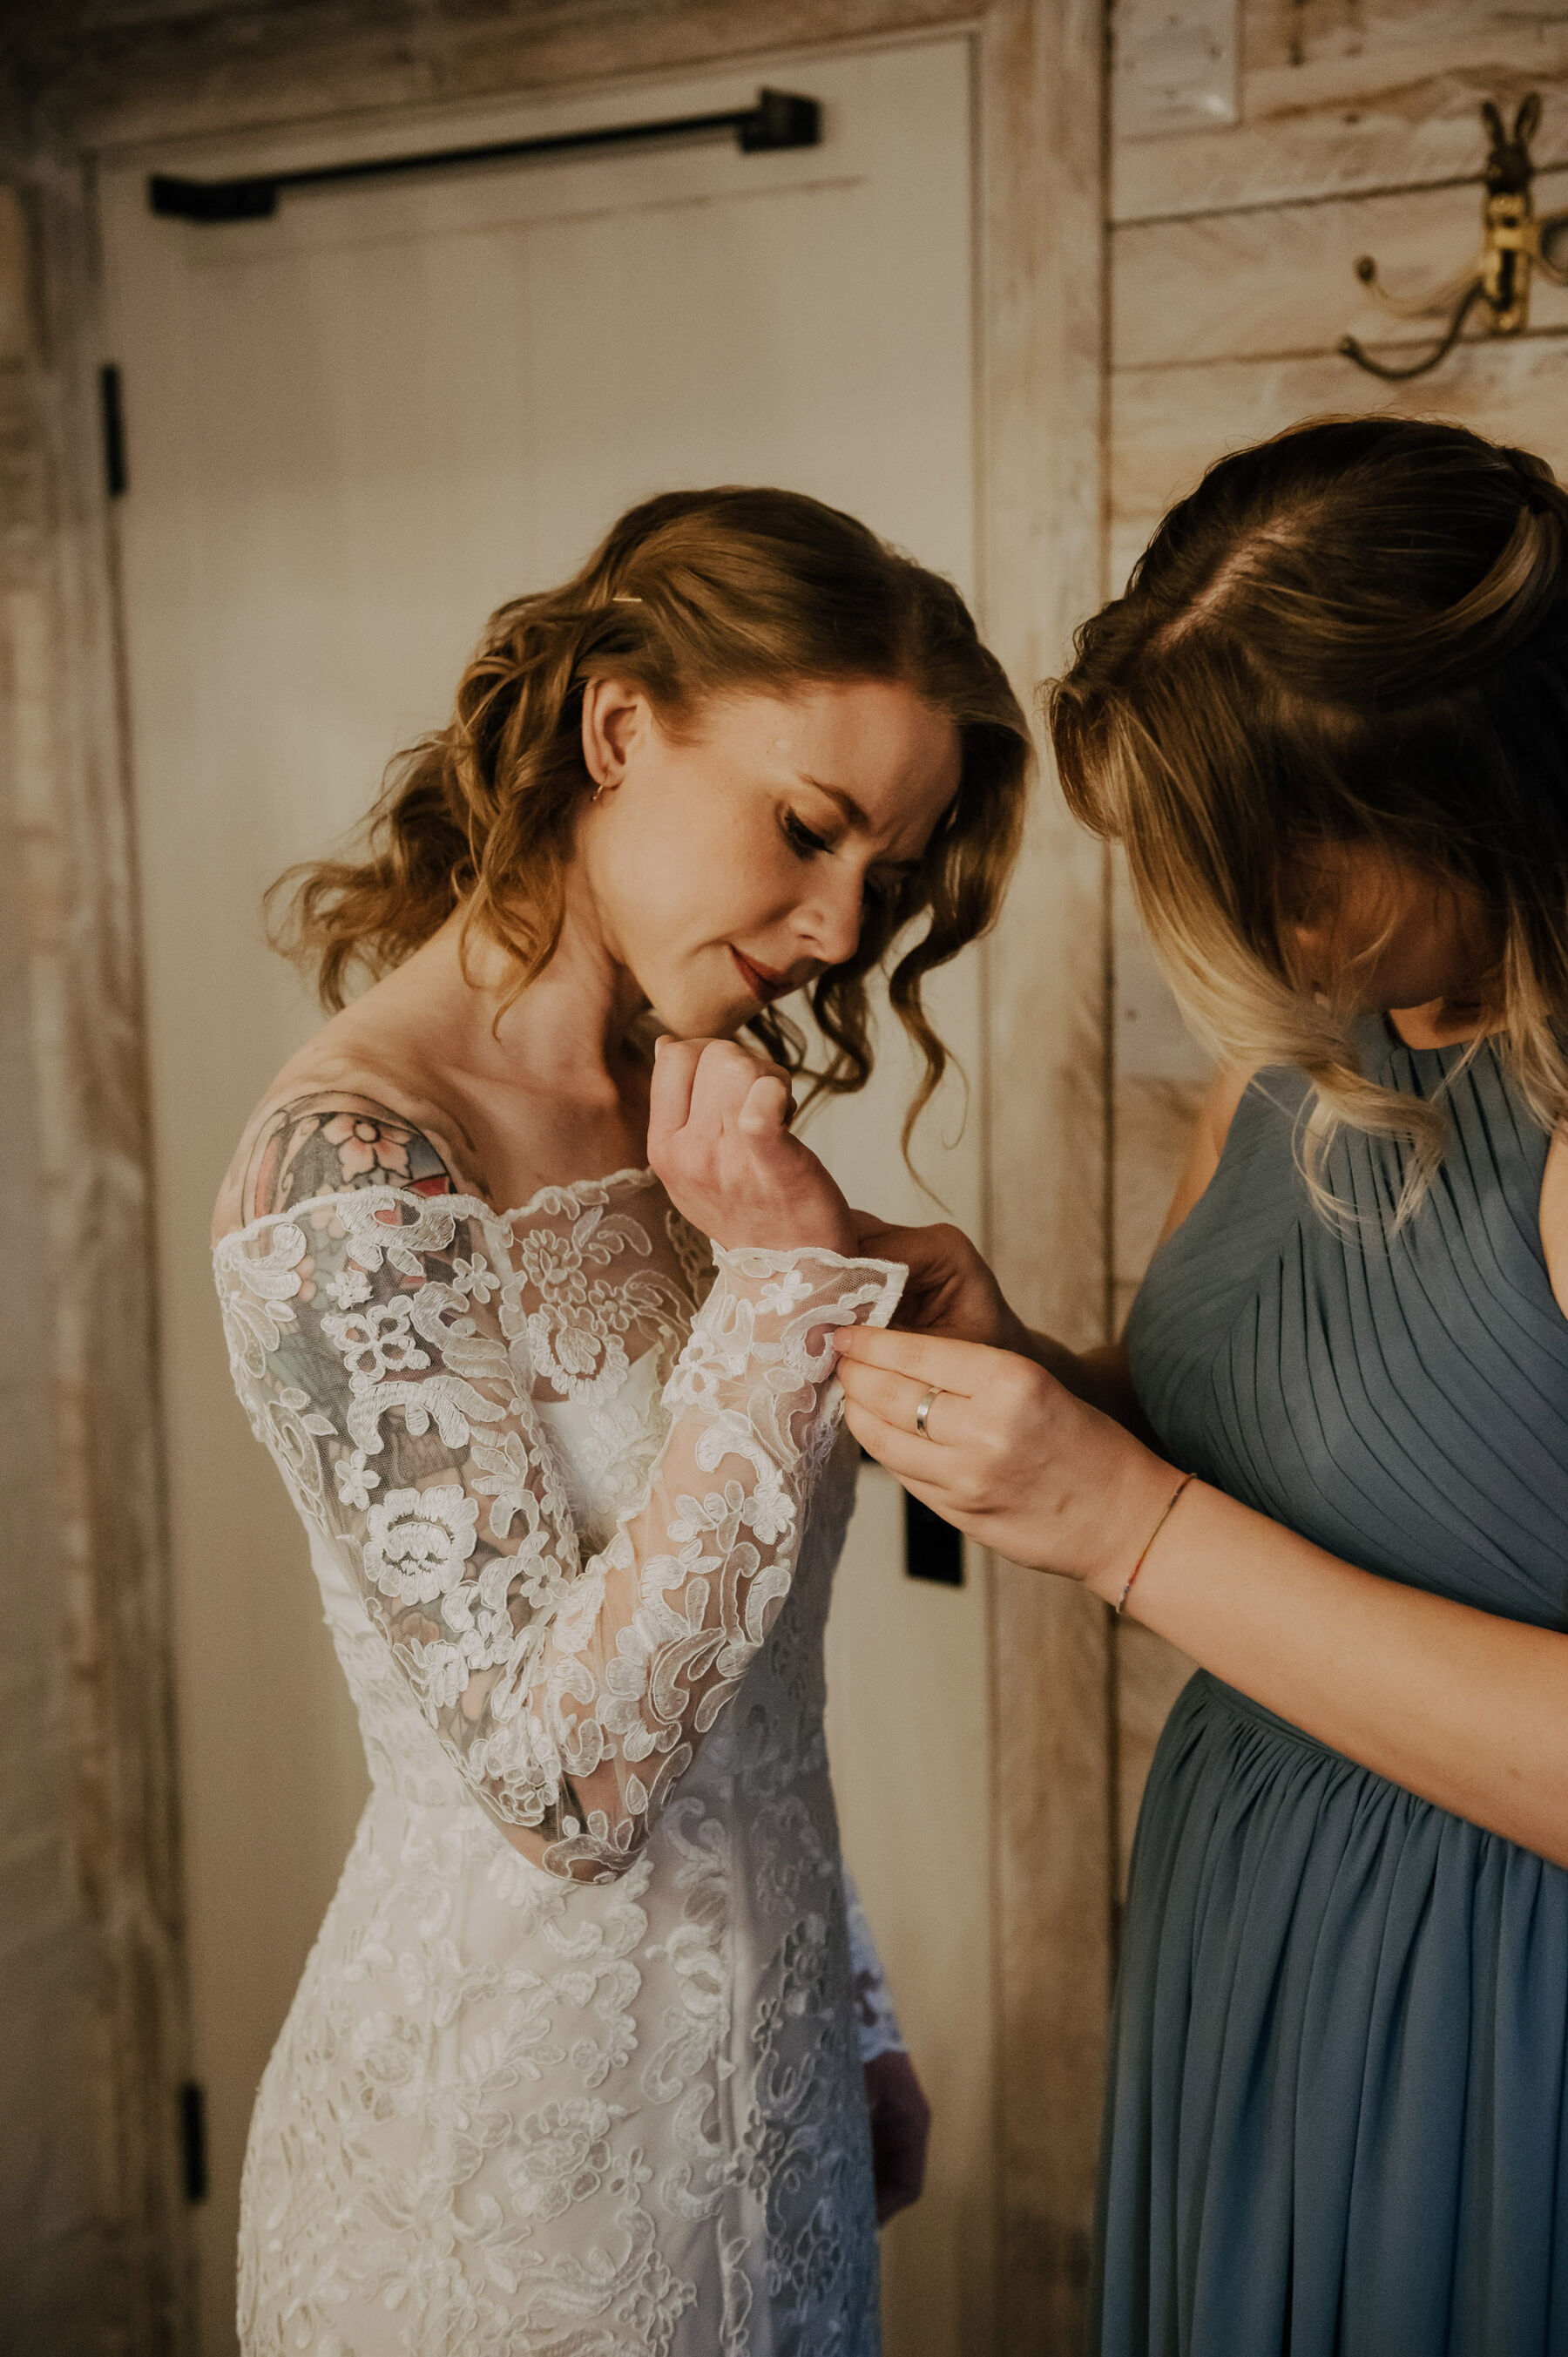 Bride with tattooed arm in Whistles wedding dress. Jessica Grace Photography.